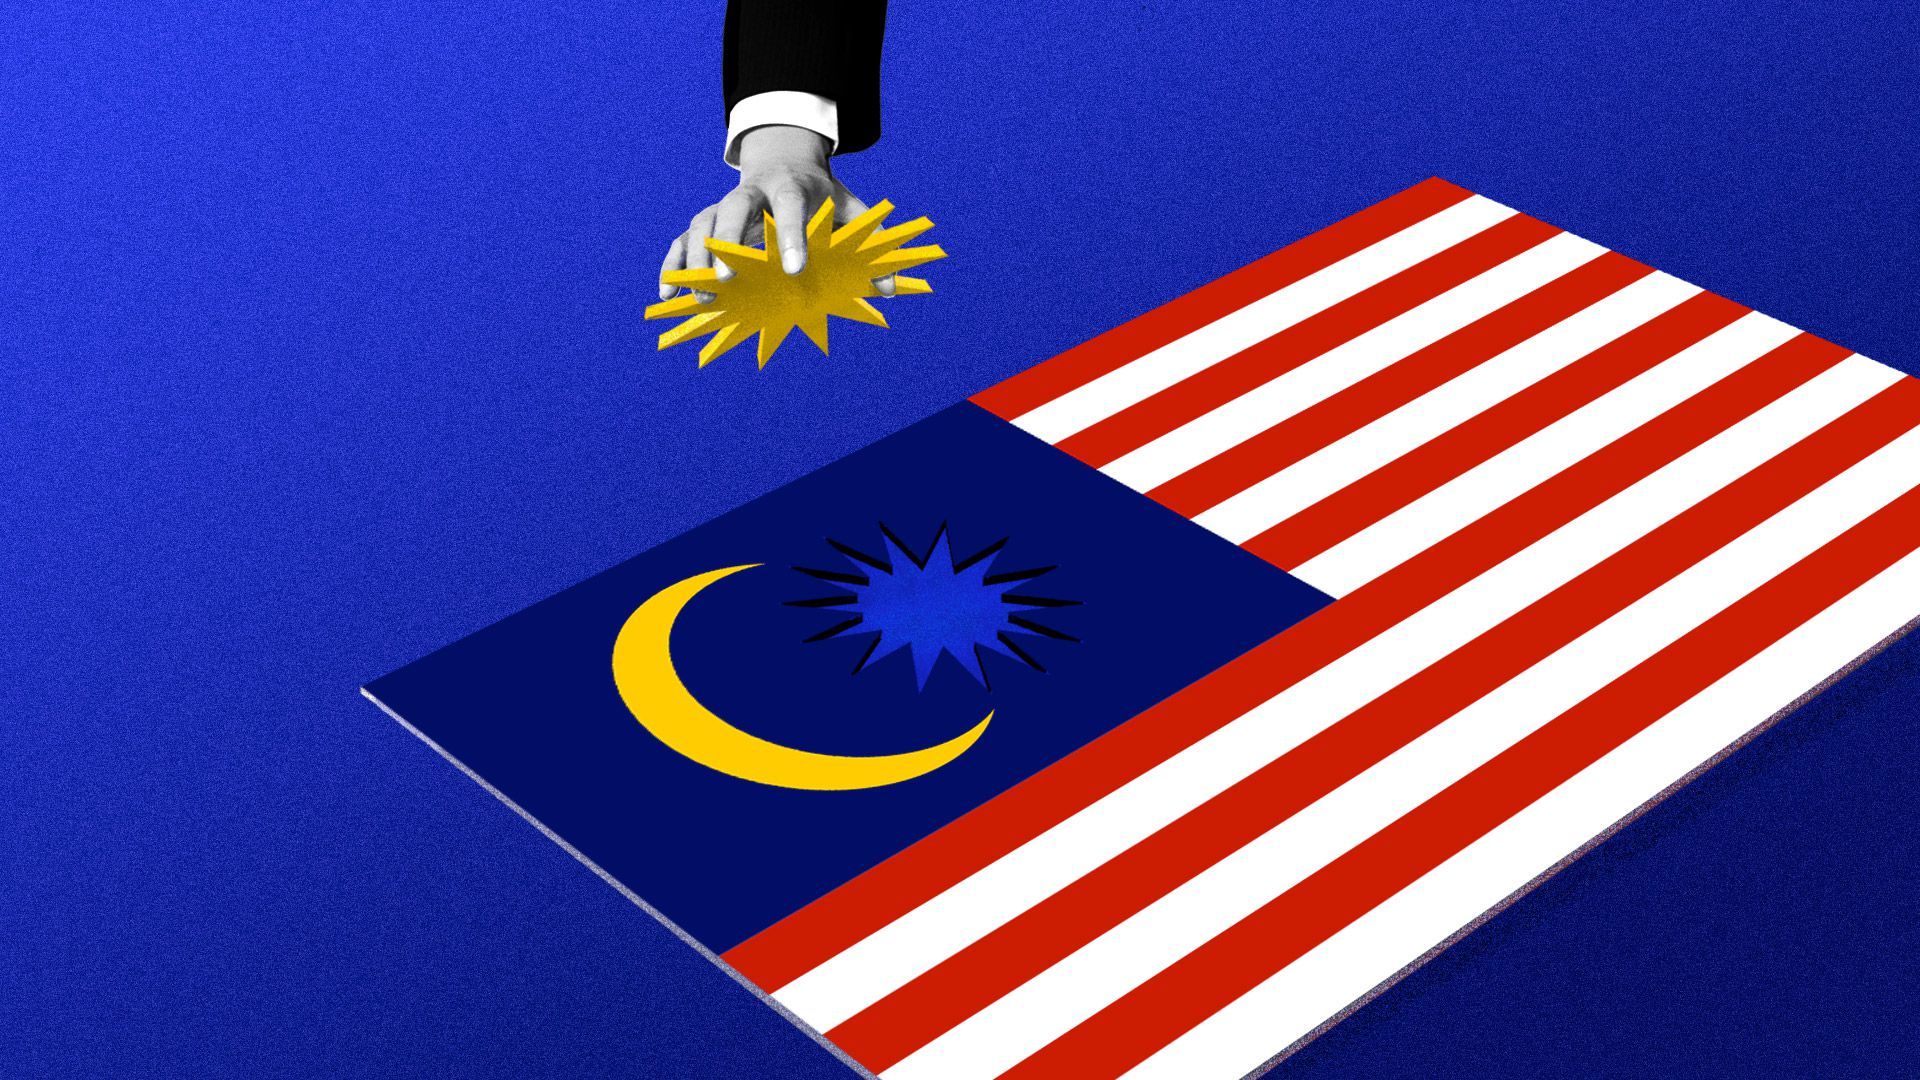 stealing the gold from the Malaysian flag